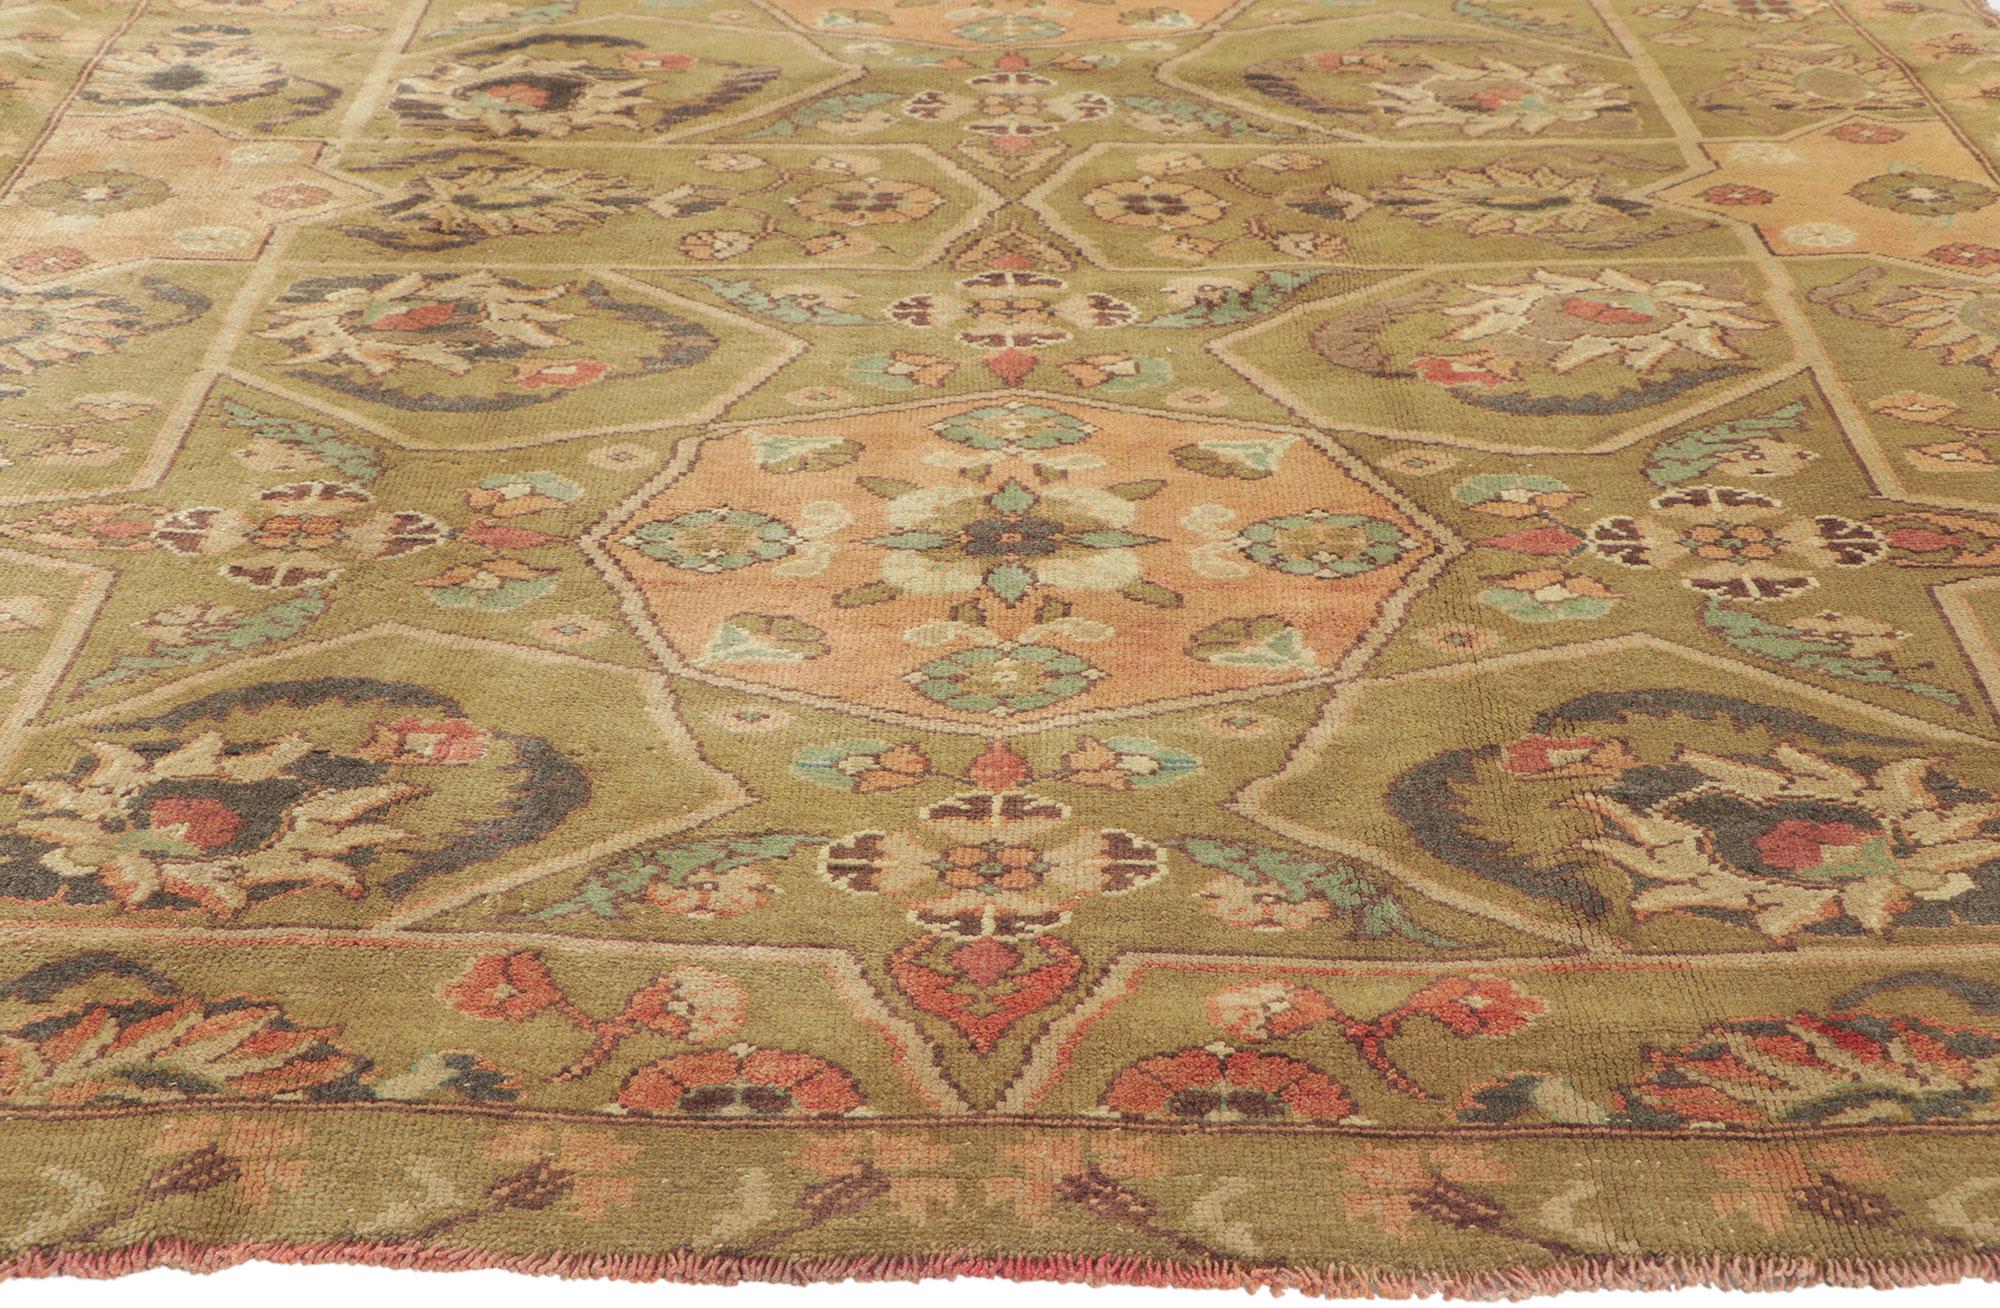 51672 vintage Turkish oushak rug, 05'07 x 09'00.
Warm and inviting with incredible detail and texture, this hand knotted wool vintage Turkish Oushak rug is a captivating vision of woven beauty. The compartmental design and earthy colorway woven